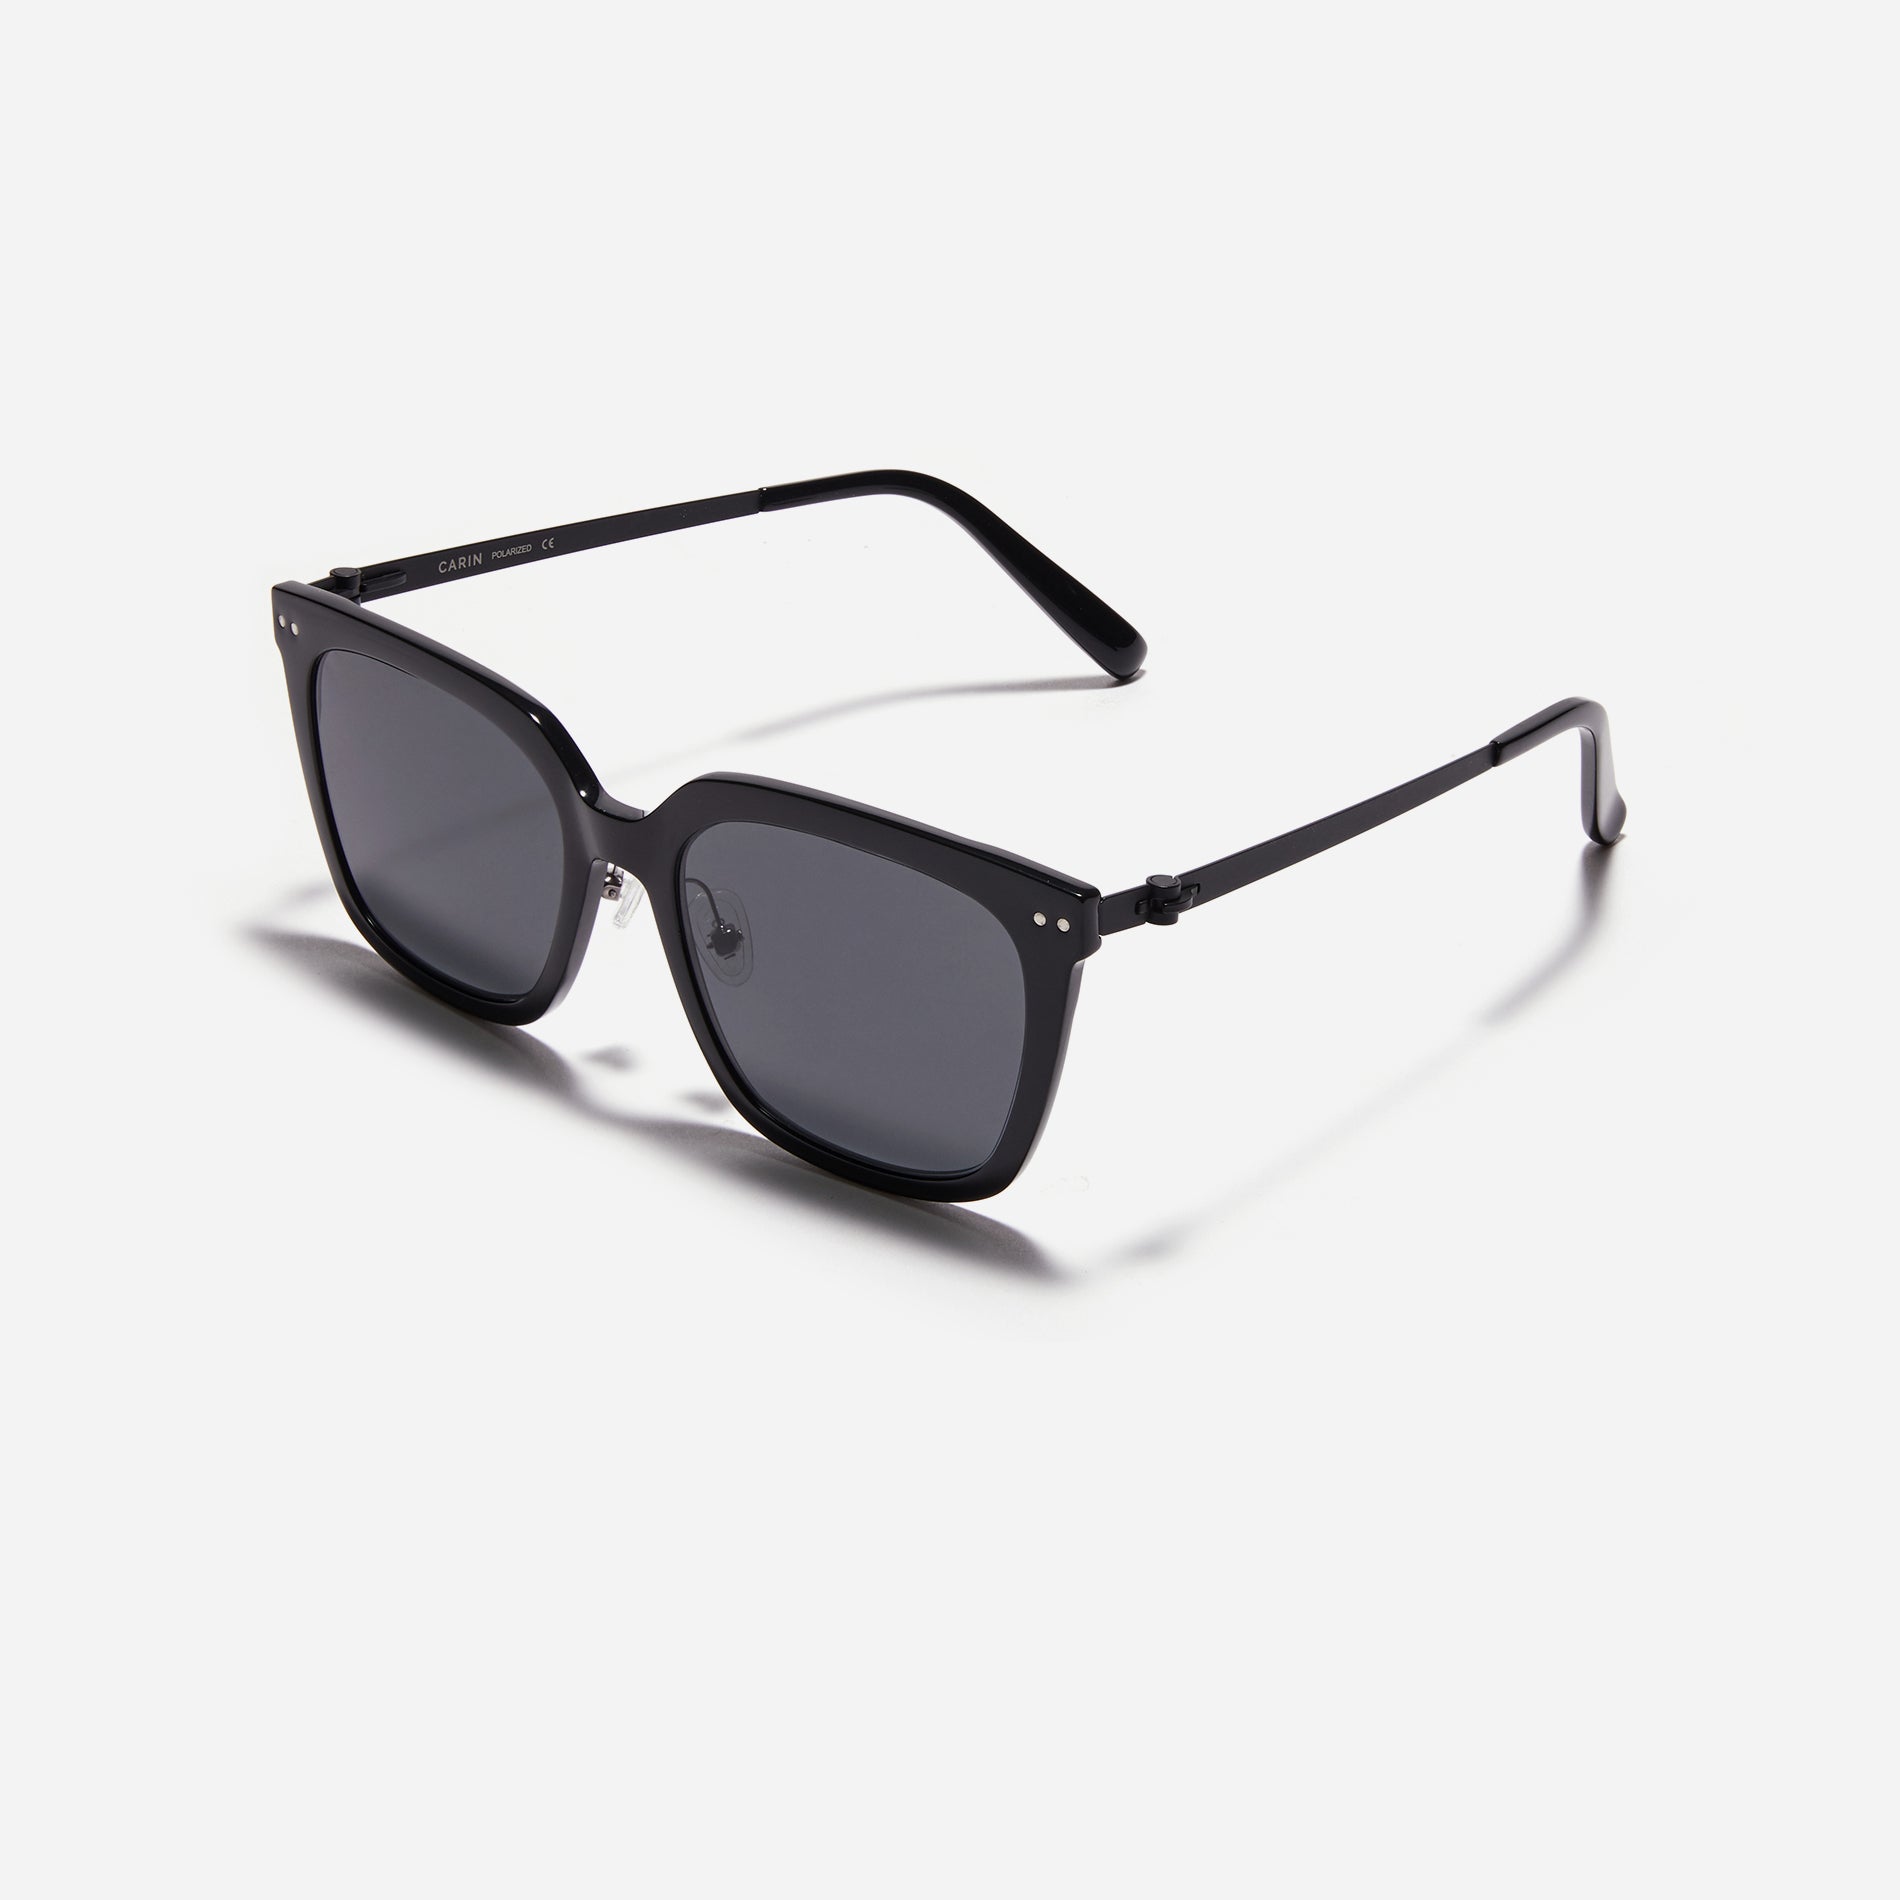 Oversized square-shaped sunglasses from the POLARIZED line. Crafted from lightweight and robust bio-plastic, the frame prevents slipping and offers enduring comfort with CARIN's patented screwless hinges.